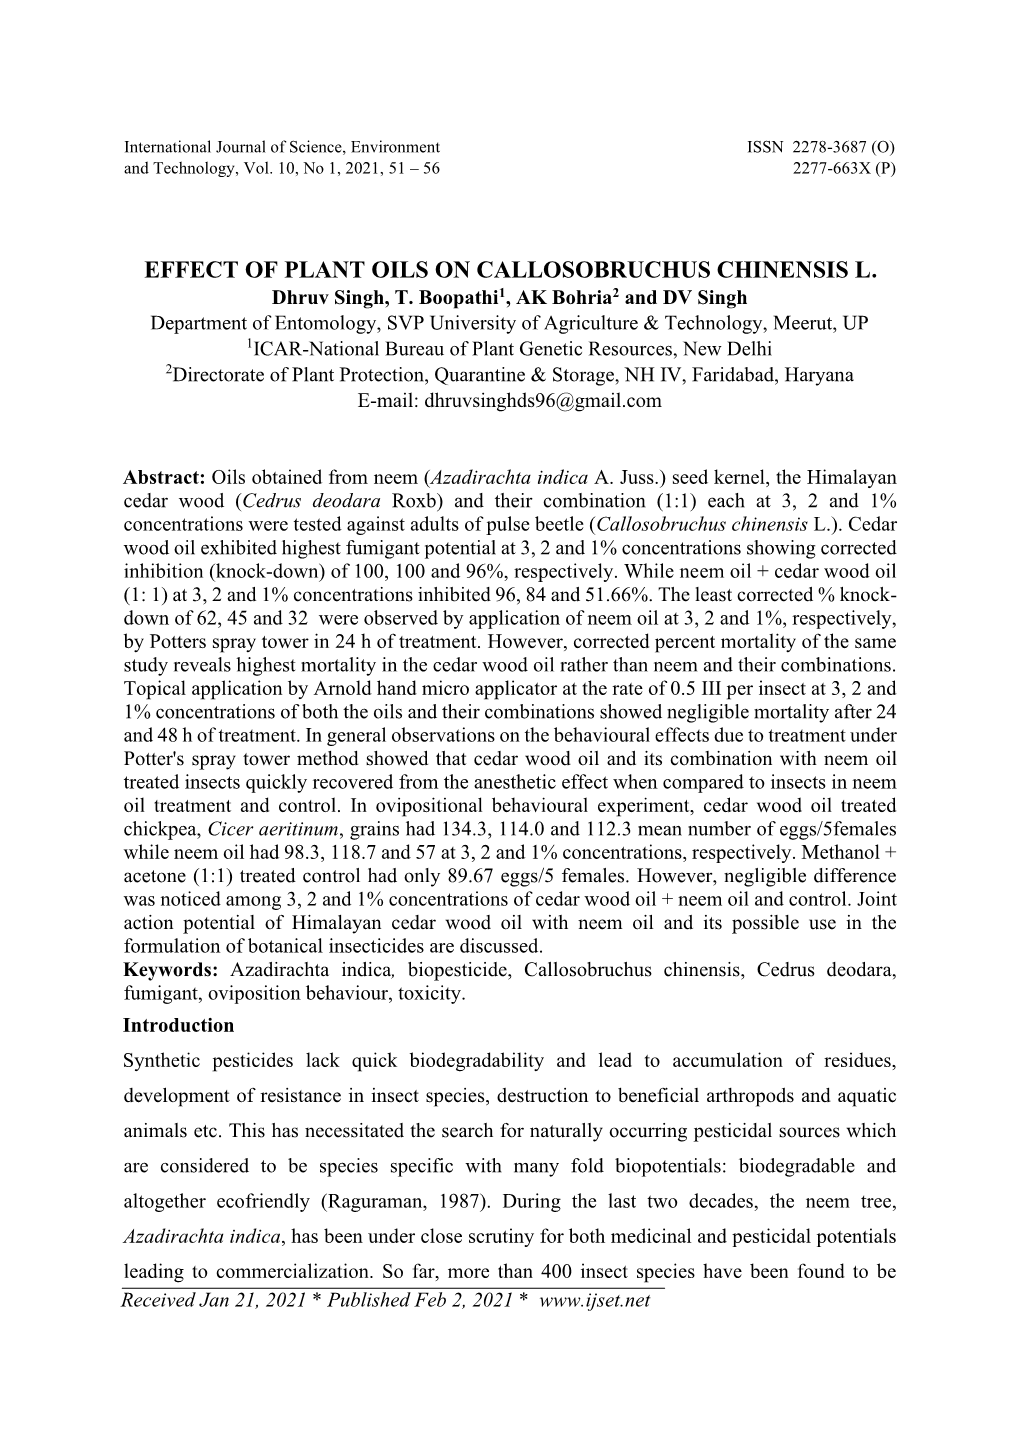 EFFECT of PLANT OILS on CALLOSOBRUCHUS CHINENSIS L. Dhruv Singh, T